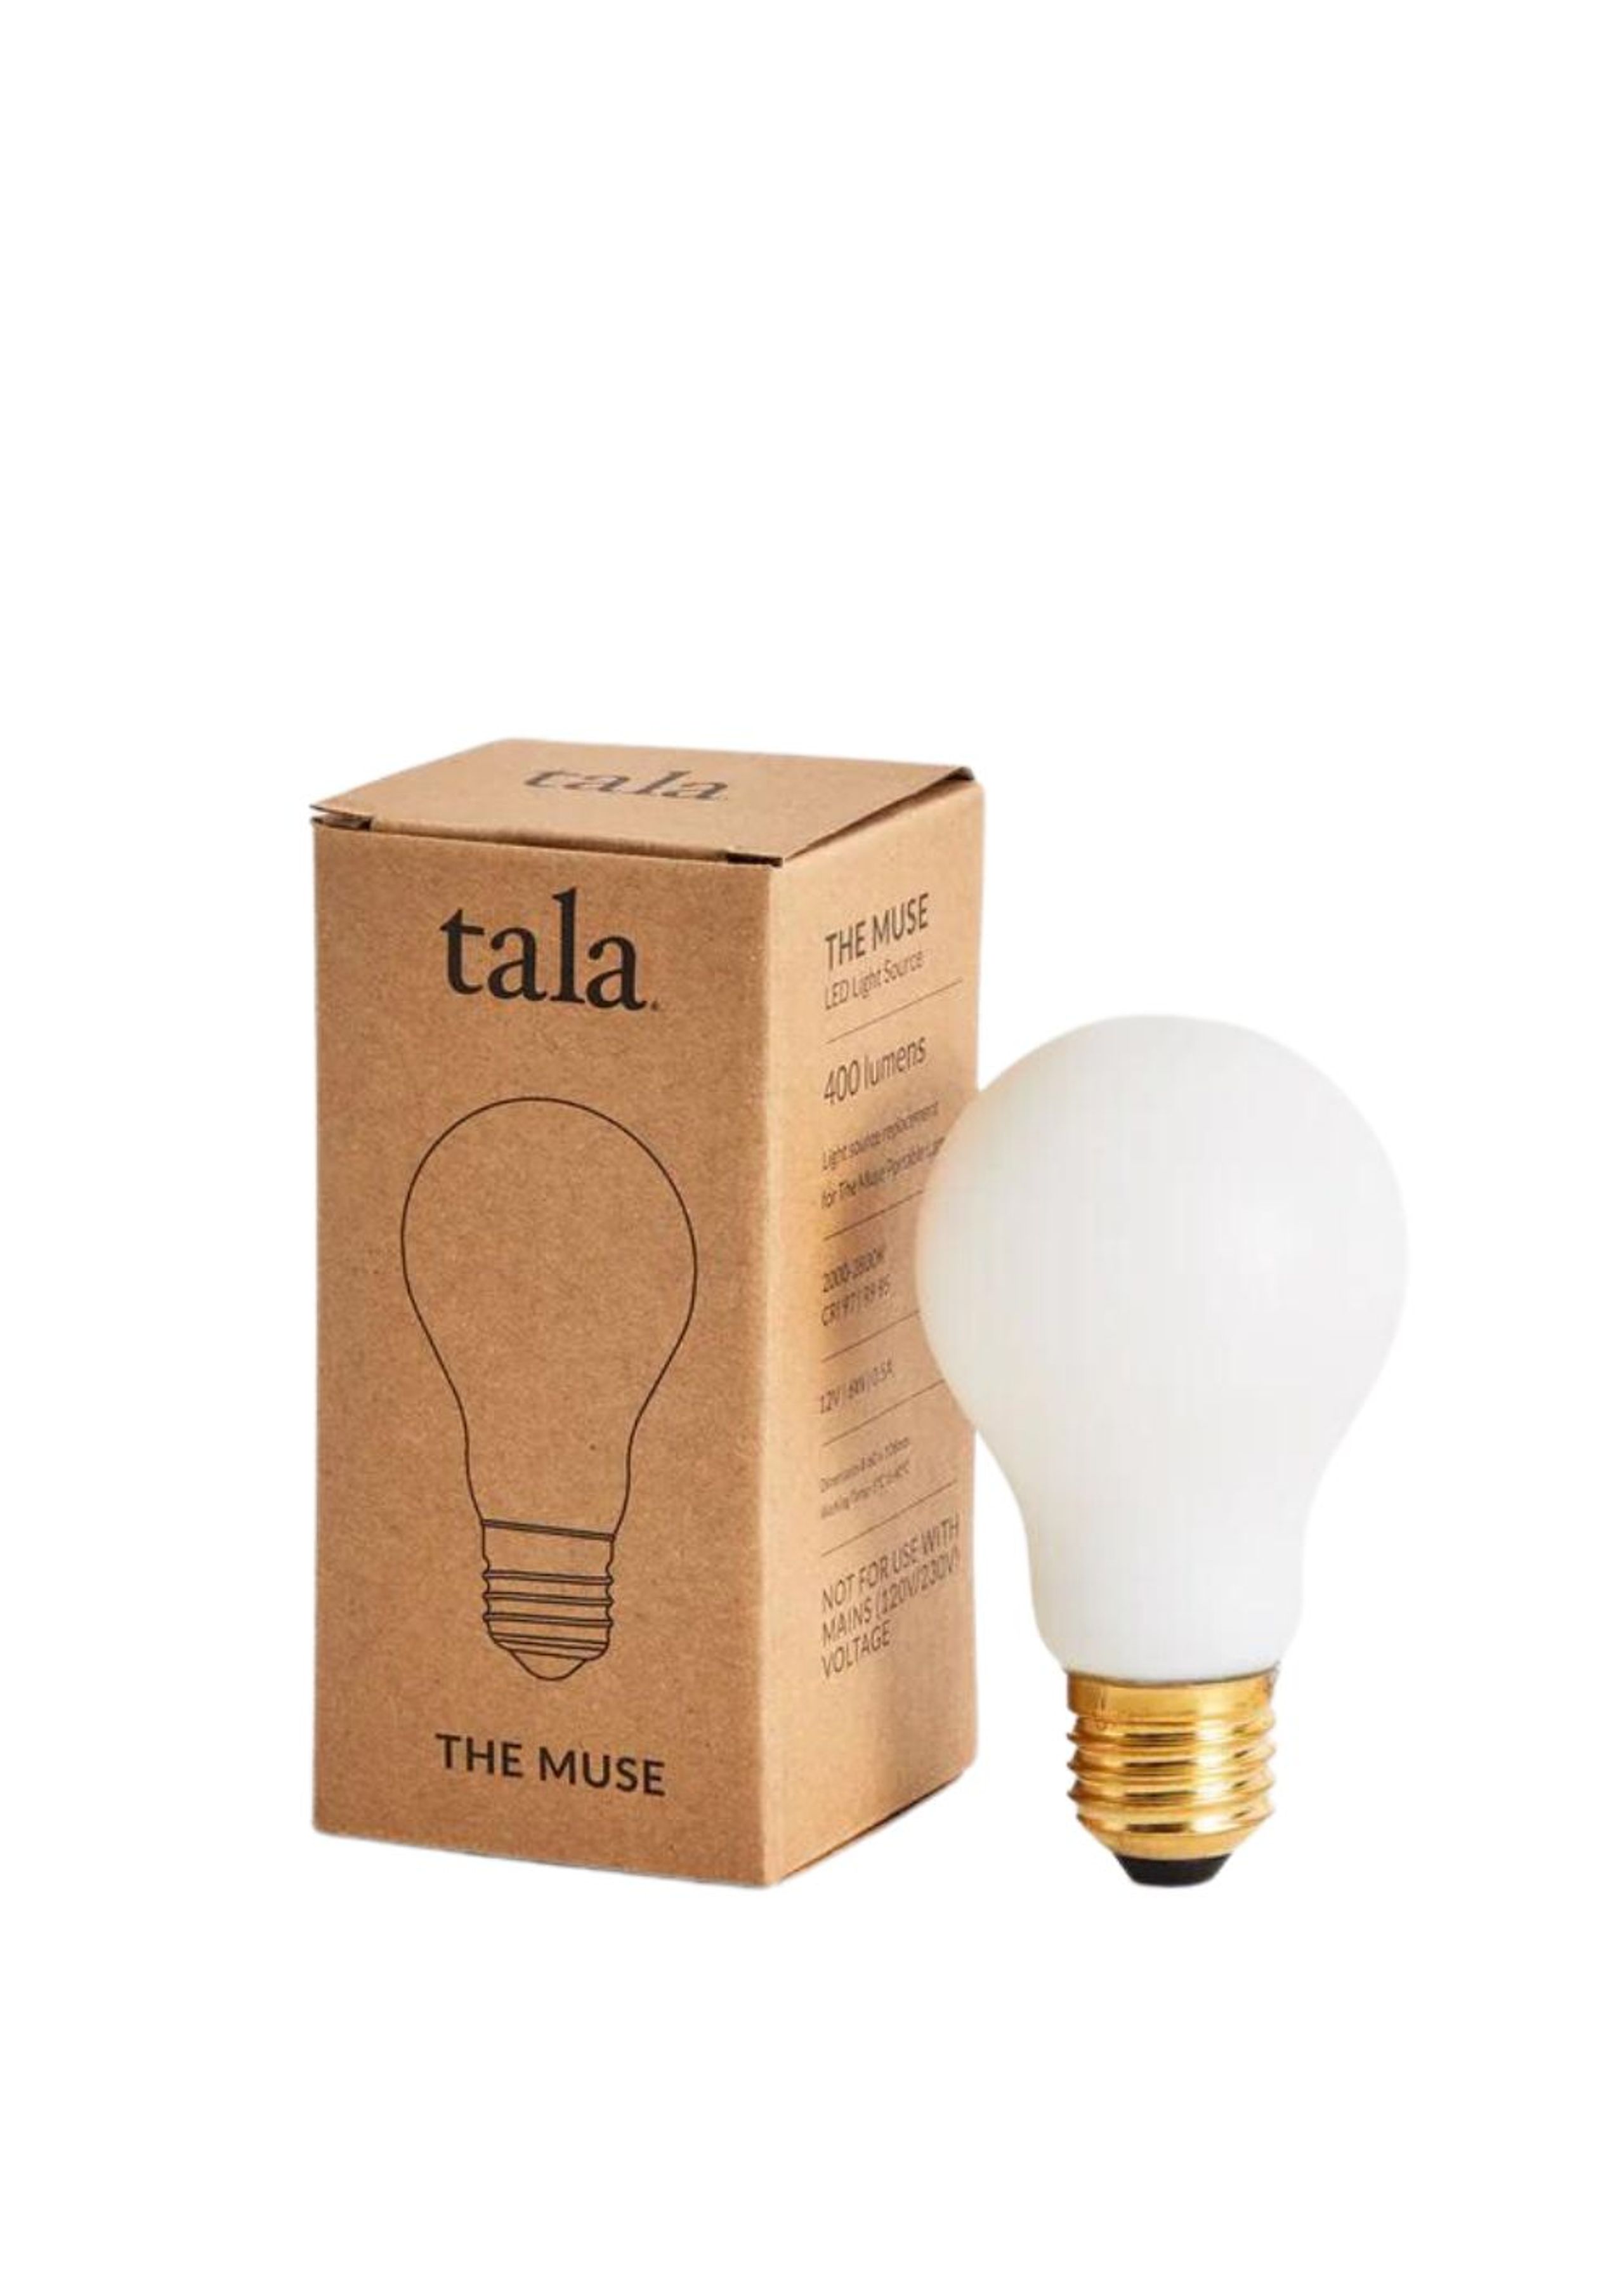 Tala - Glühbirne - The Muse 6W Replacement Bulb - White & Gold